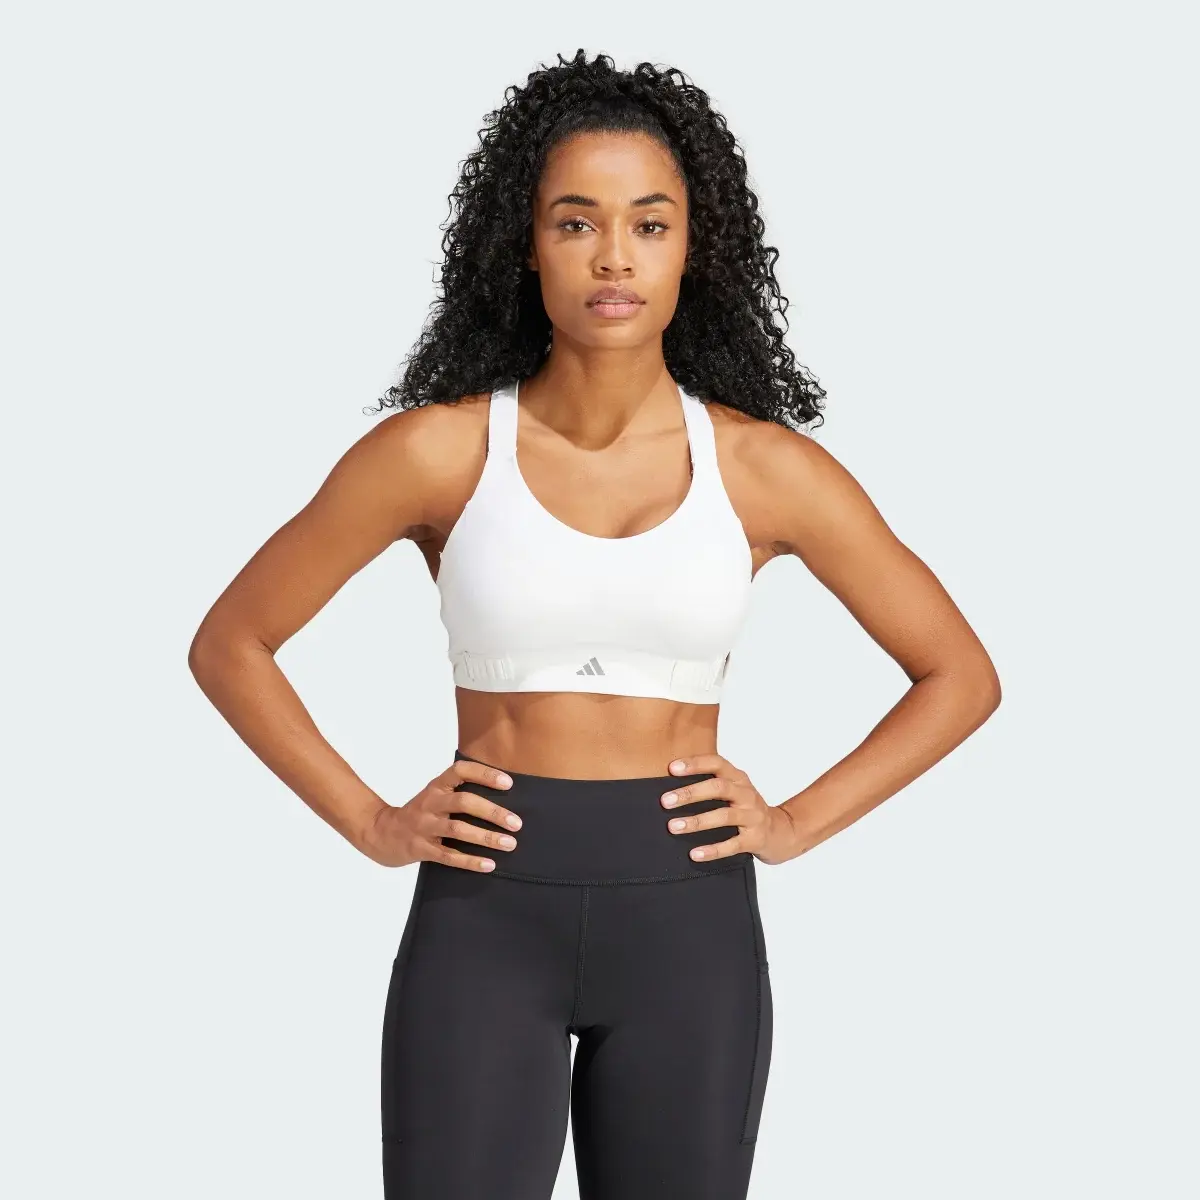 Adidas Collective Power Fastimpact Luxe High-Support Bra. 2